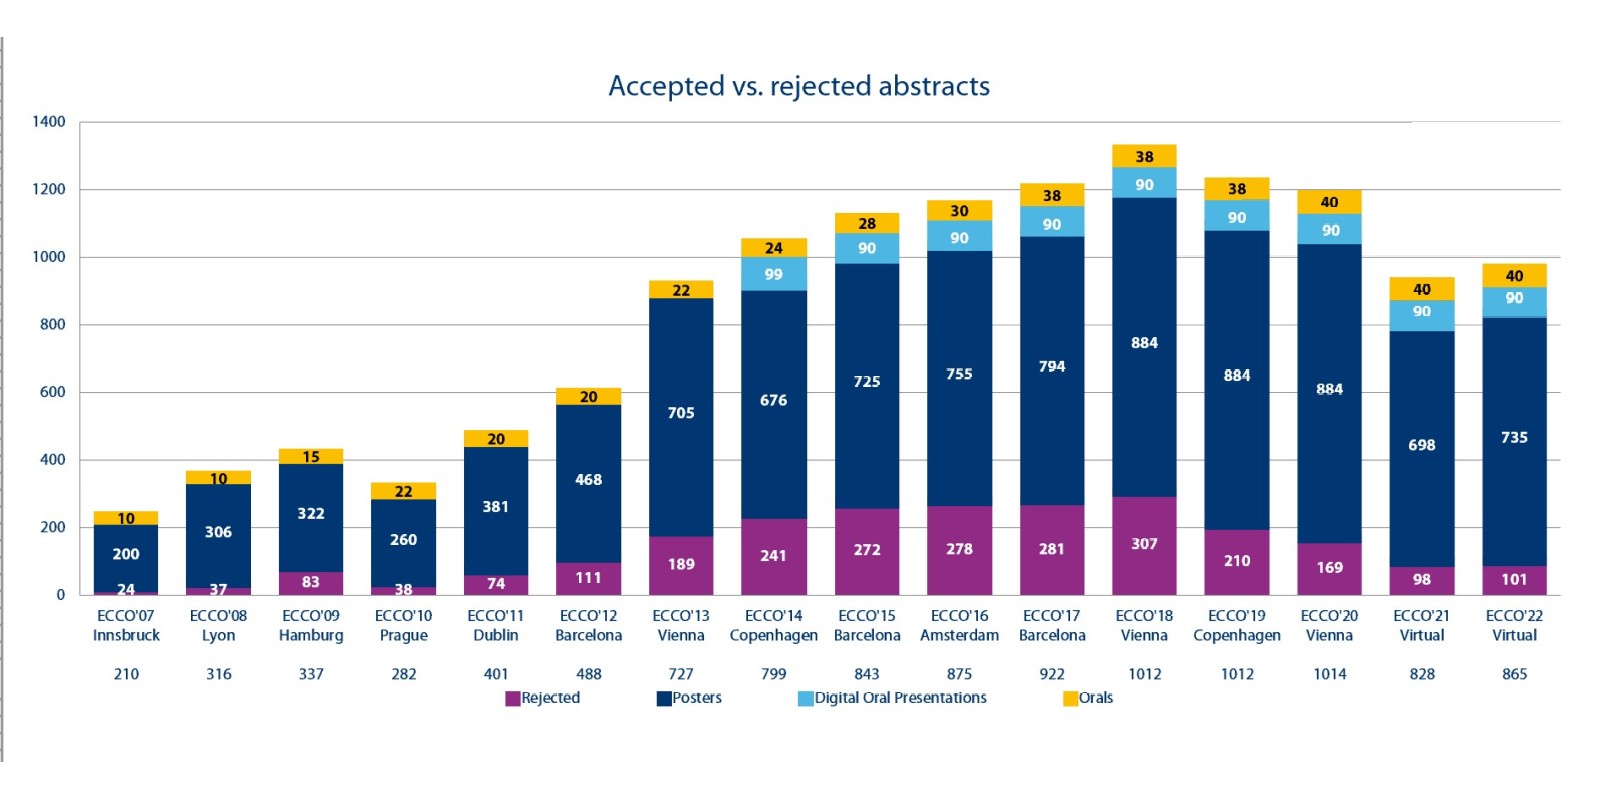 Abstracts - Accepted vs. Rejected